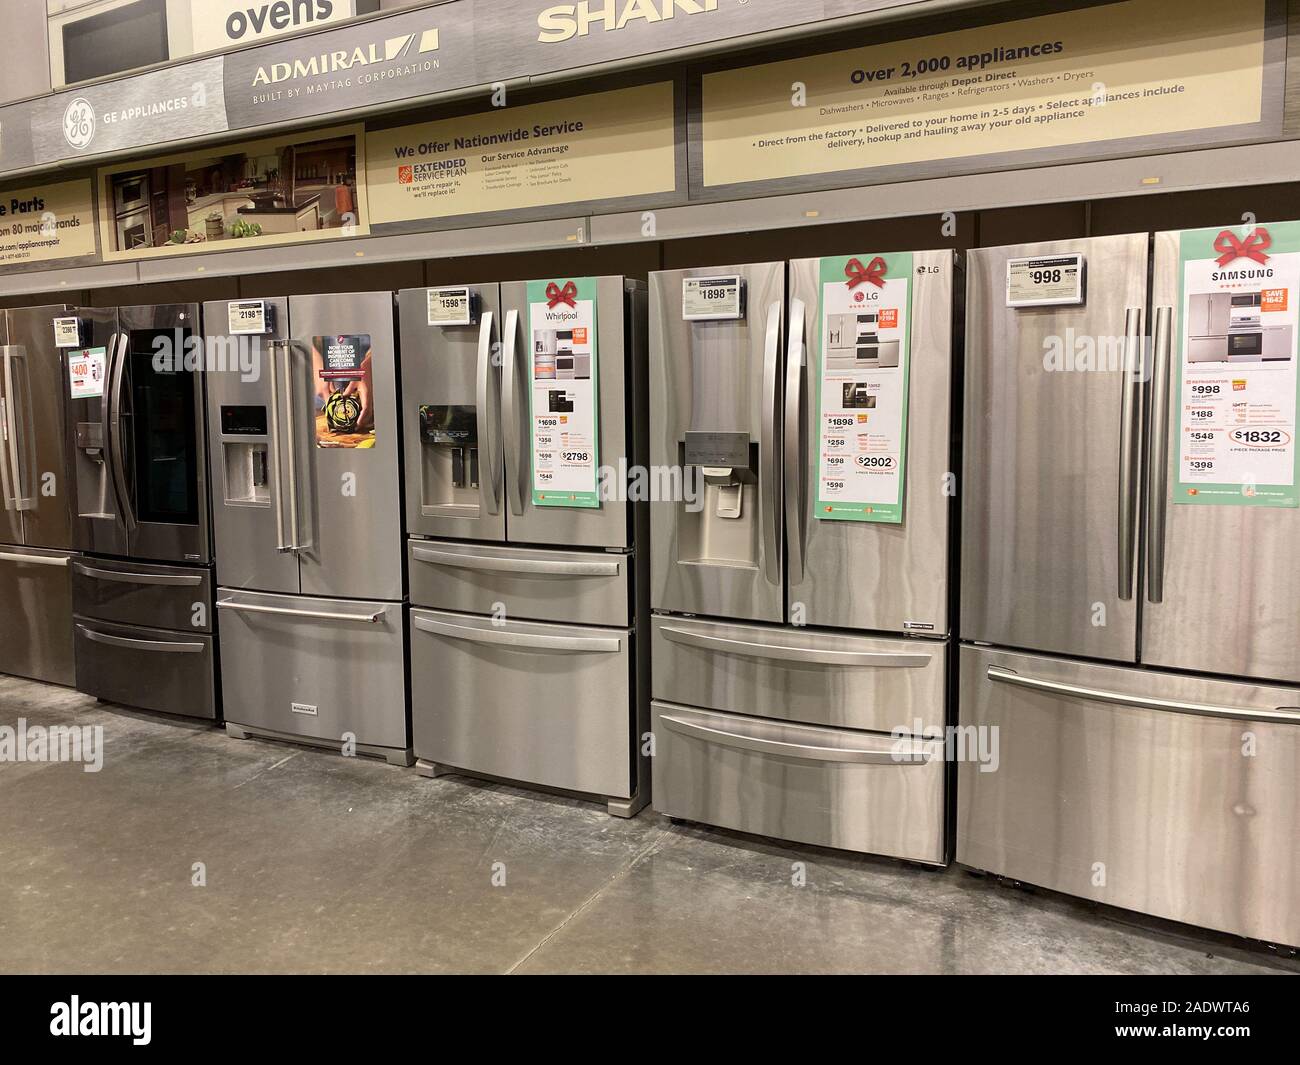 Orlando,FL/USA-11/11/19: A row of stainless steel french door refrigerators on sale at a Home Depot Store. Stock Photo